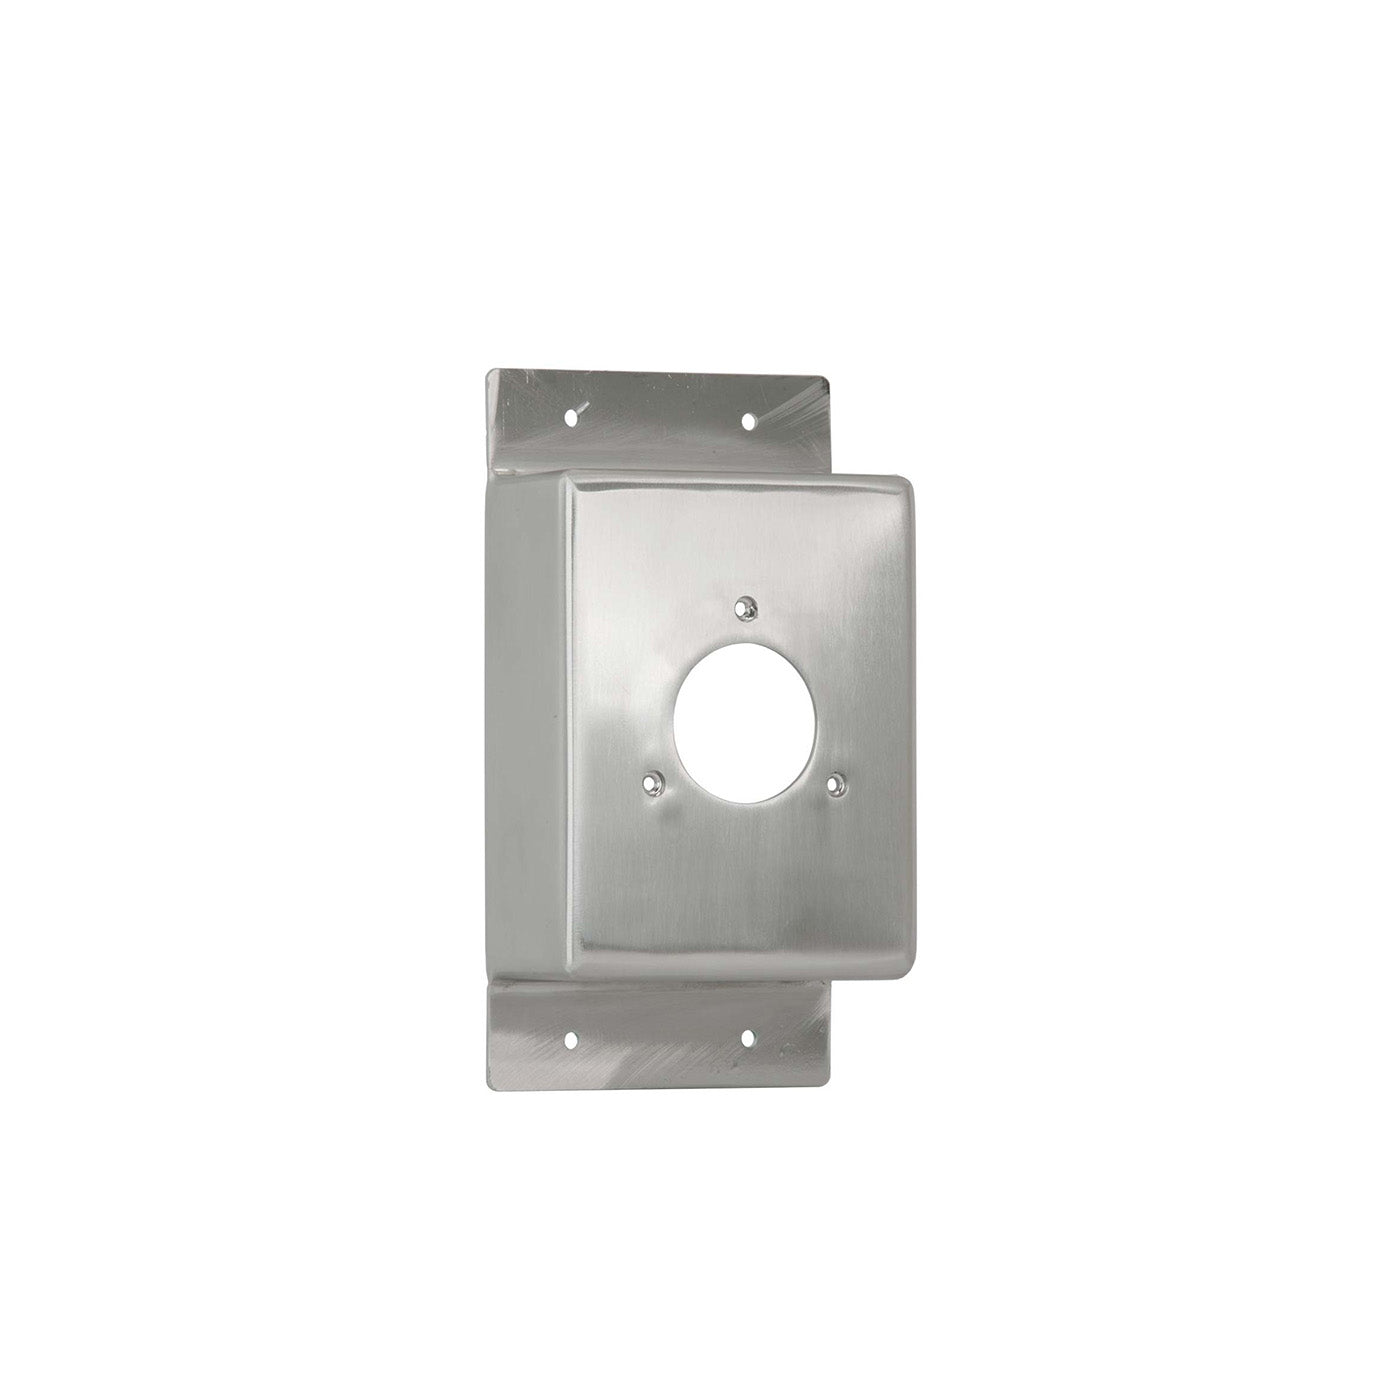 Stainless Steel Mounting Box - V1+